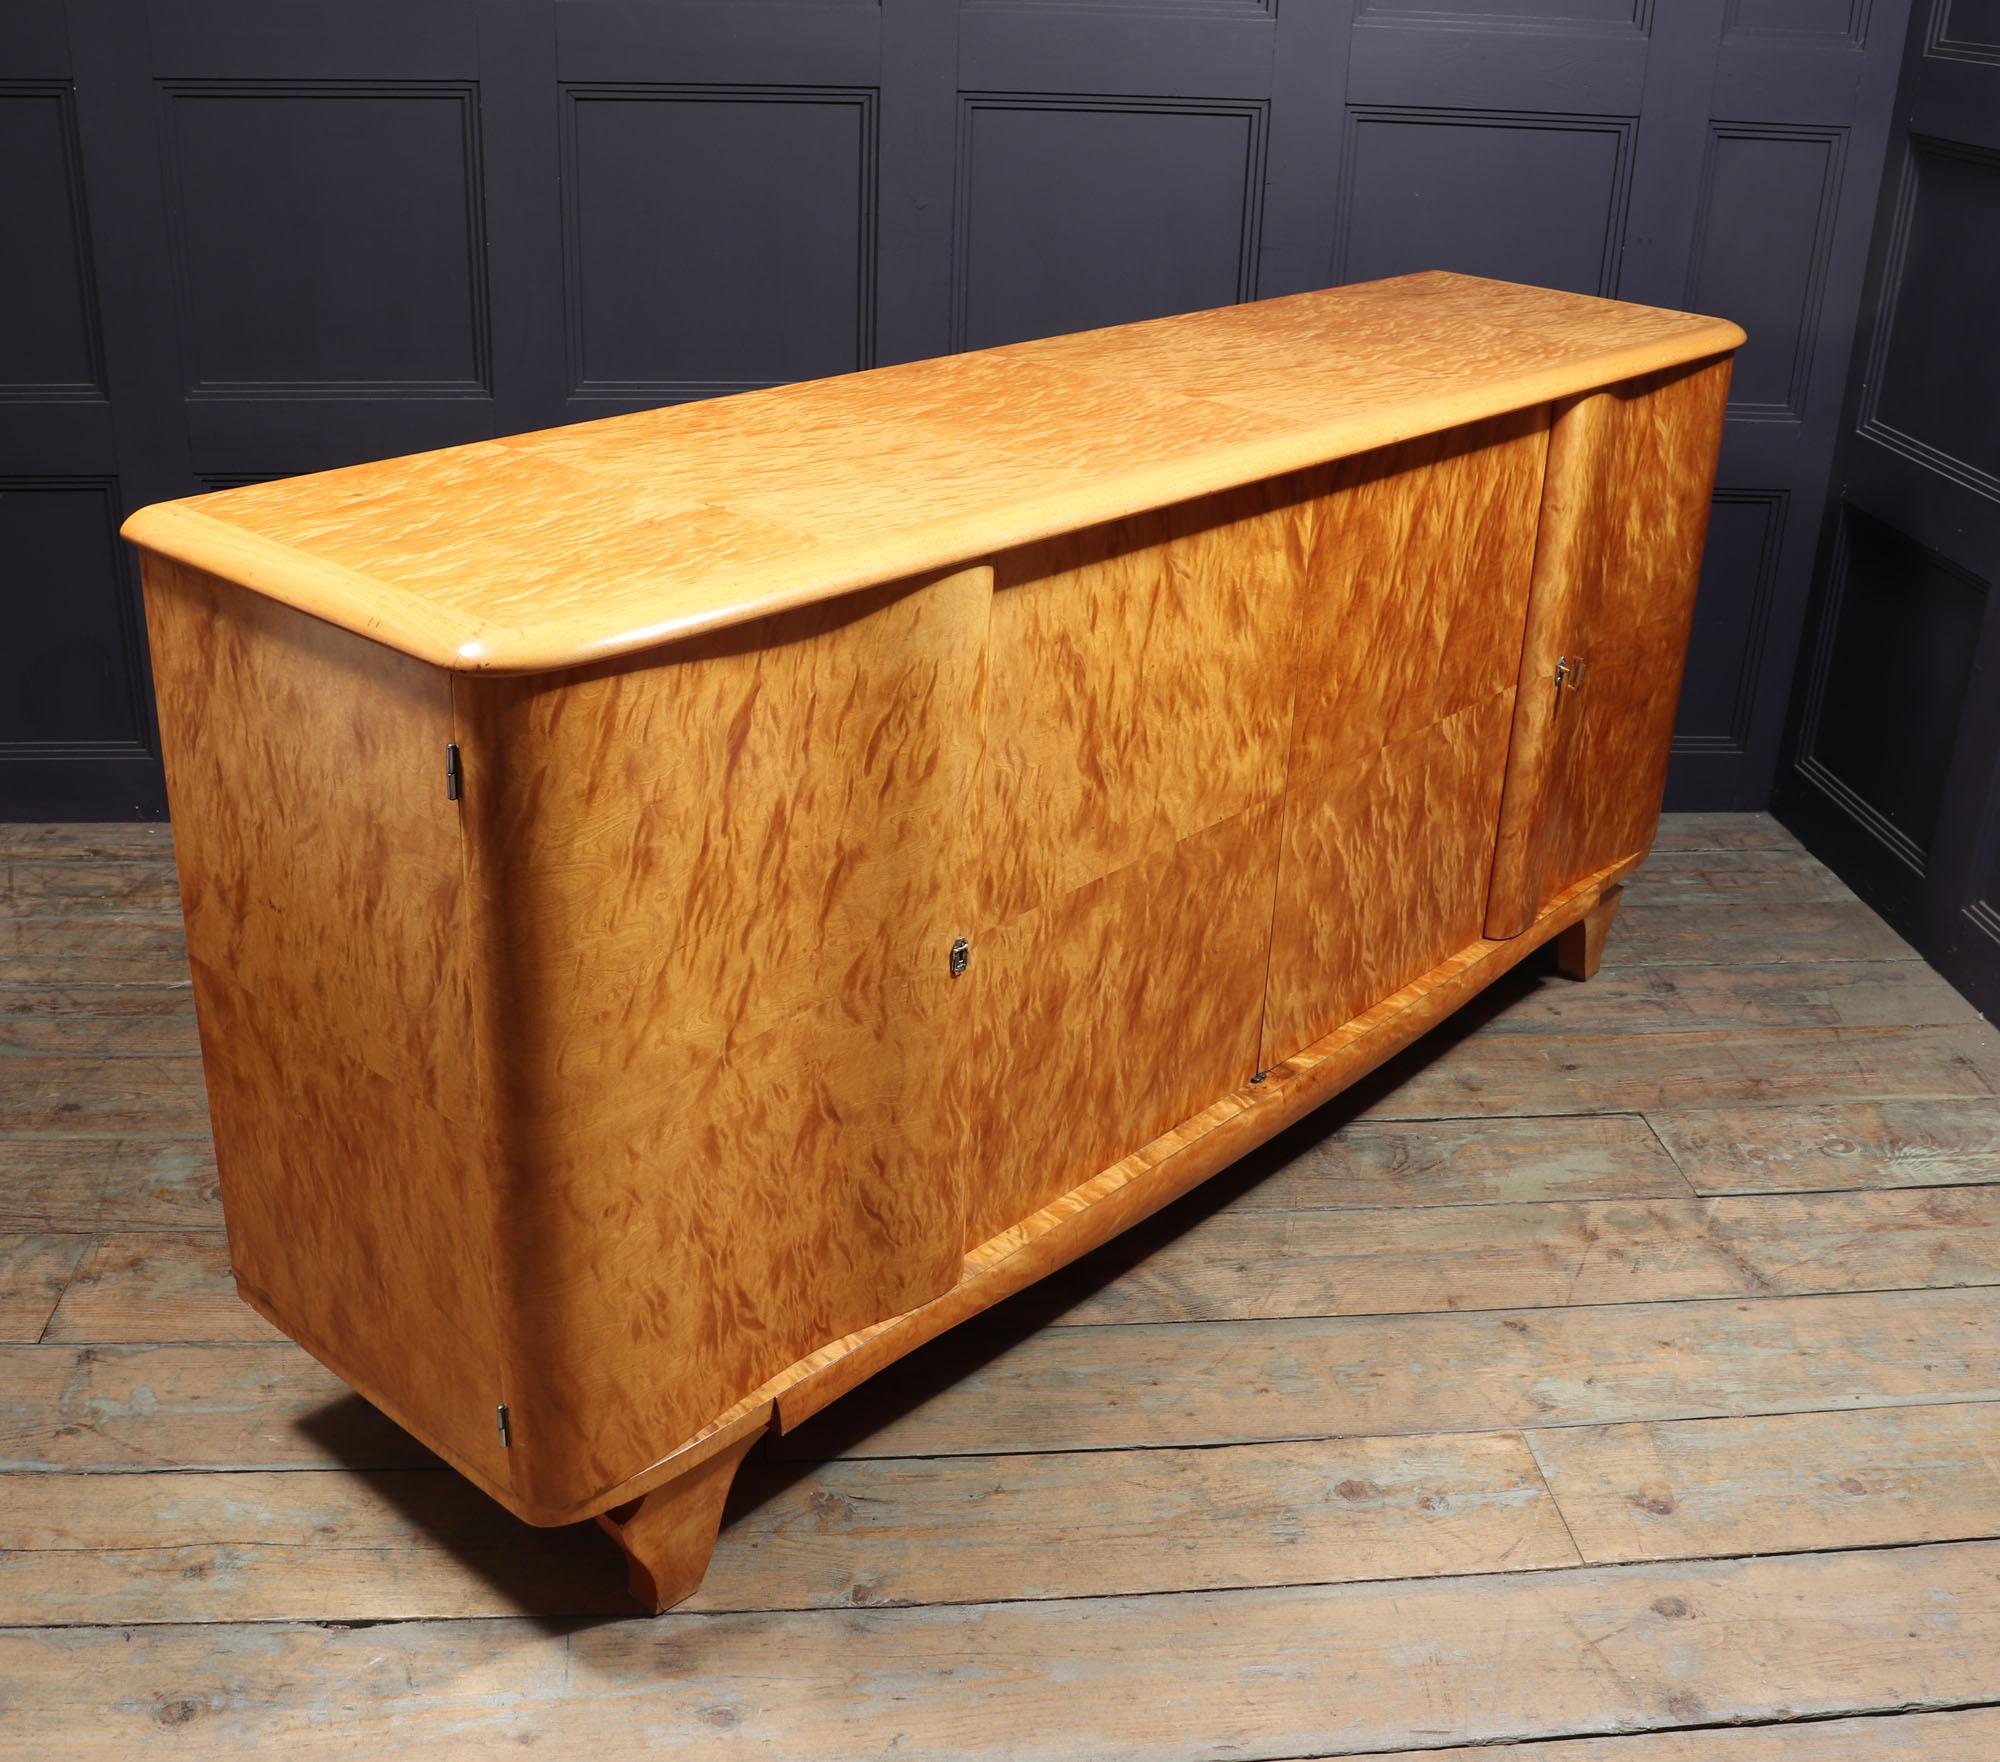 A very good quality four door sideboard in quilted maple, with shaped outer doors that close over the inner doors, locks are working with original key, shelves behind and one internal drawer, the sideboard has been fully polished and in very good